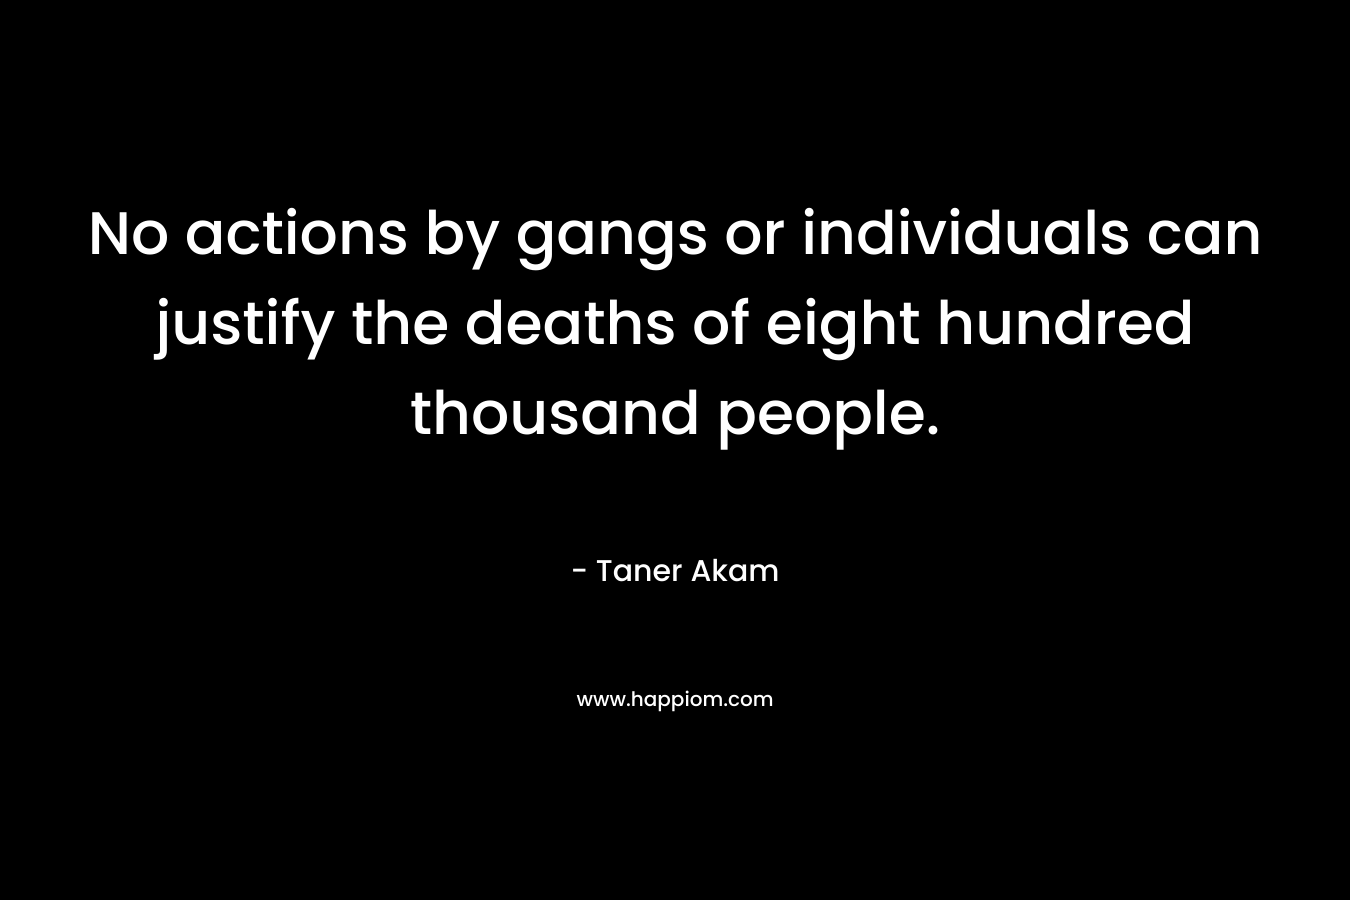 No actions by gangs or individuals can justify the deaths of eight hundred thousand people.